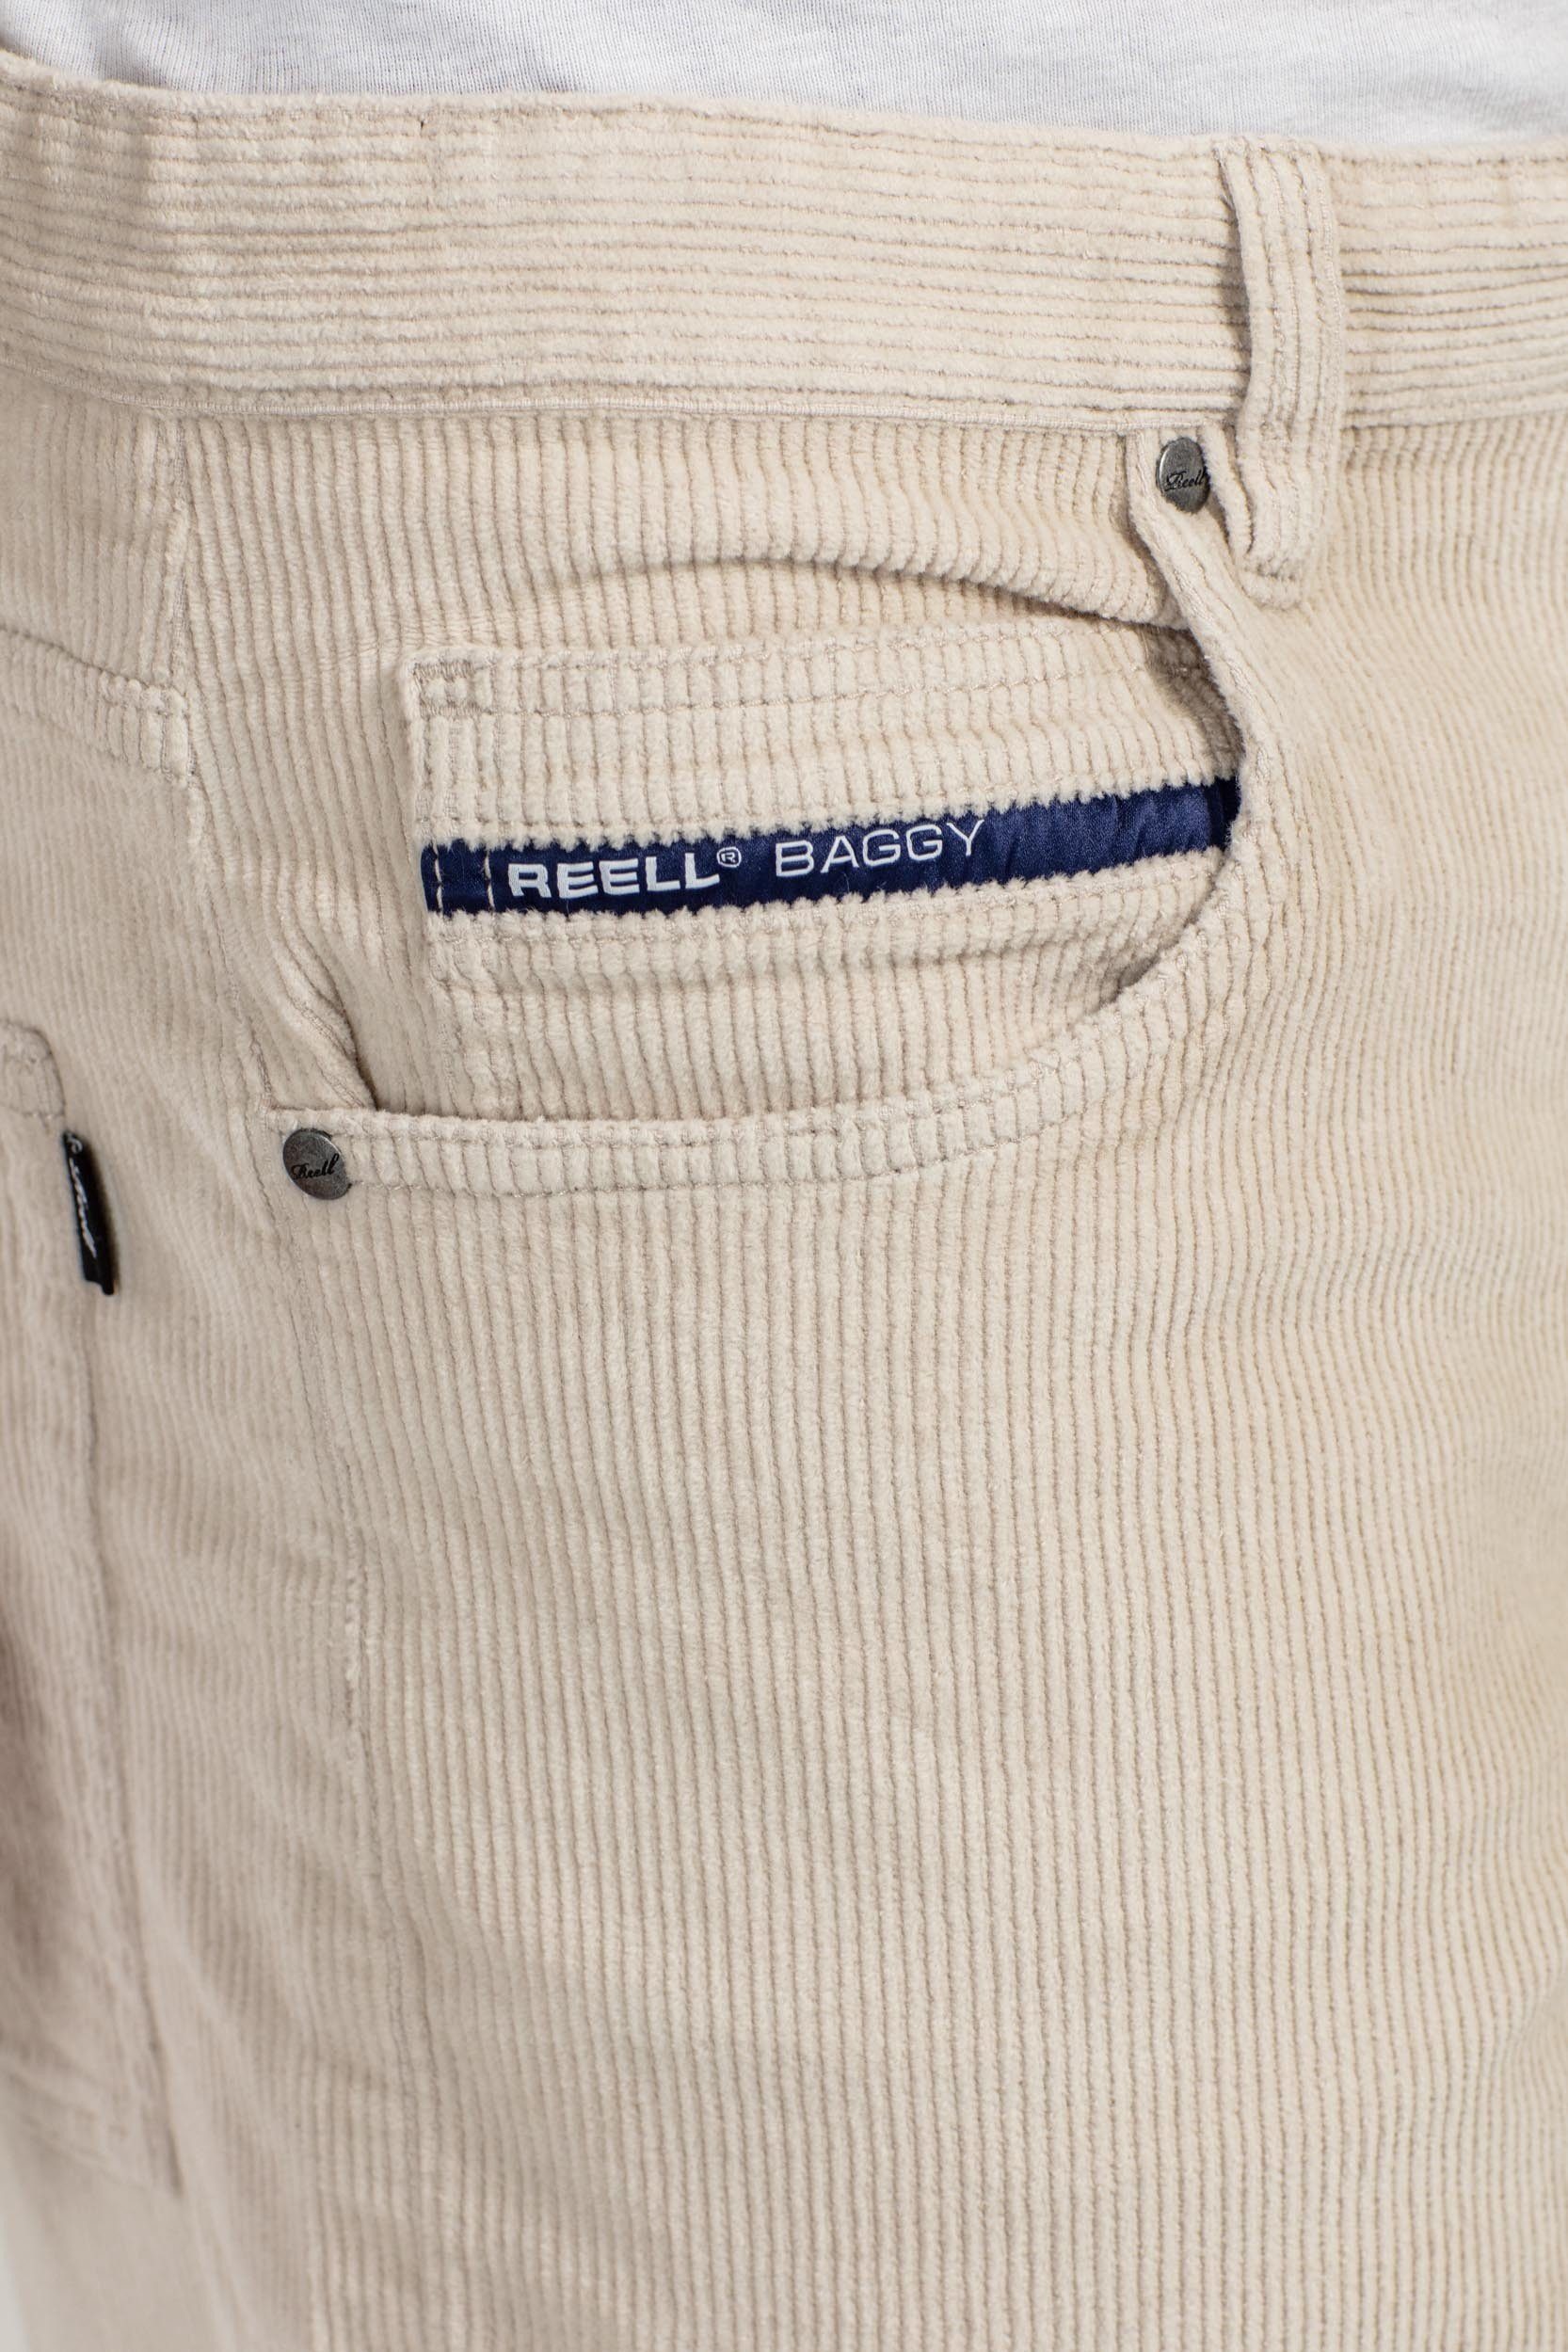 REELL Reell Cord Baggy Cordhose Hose